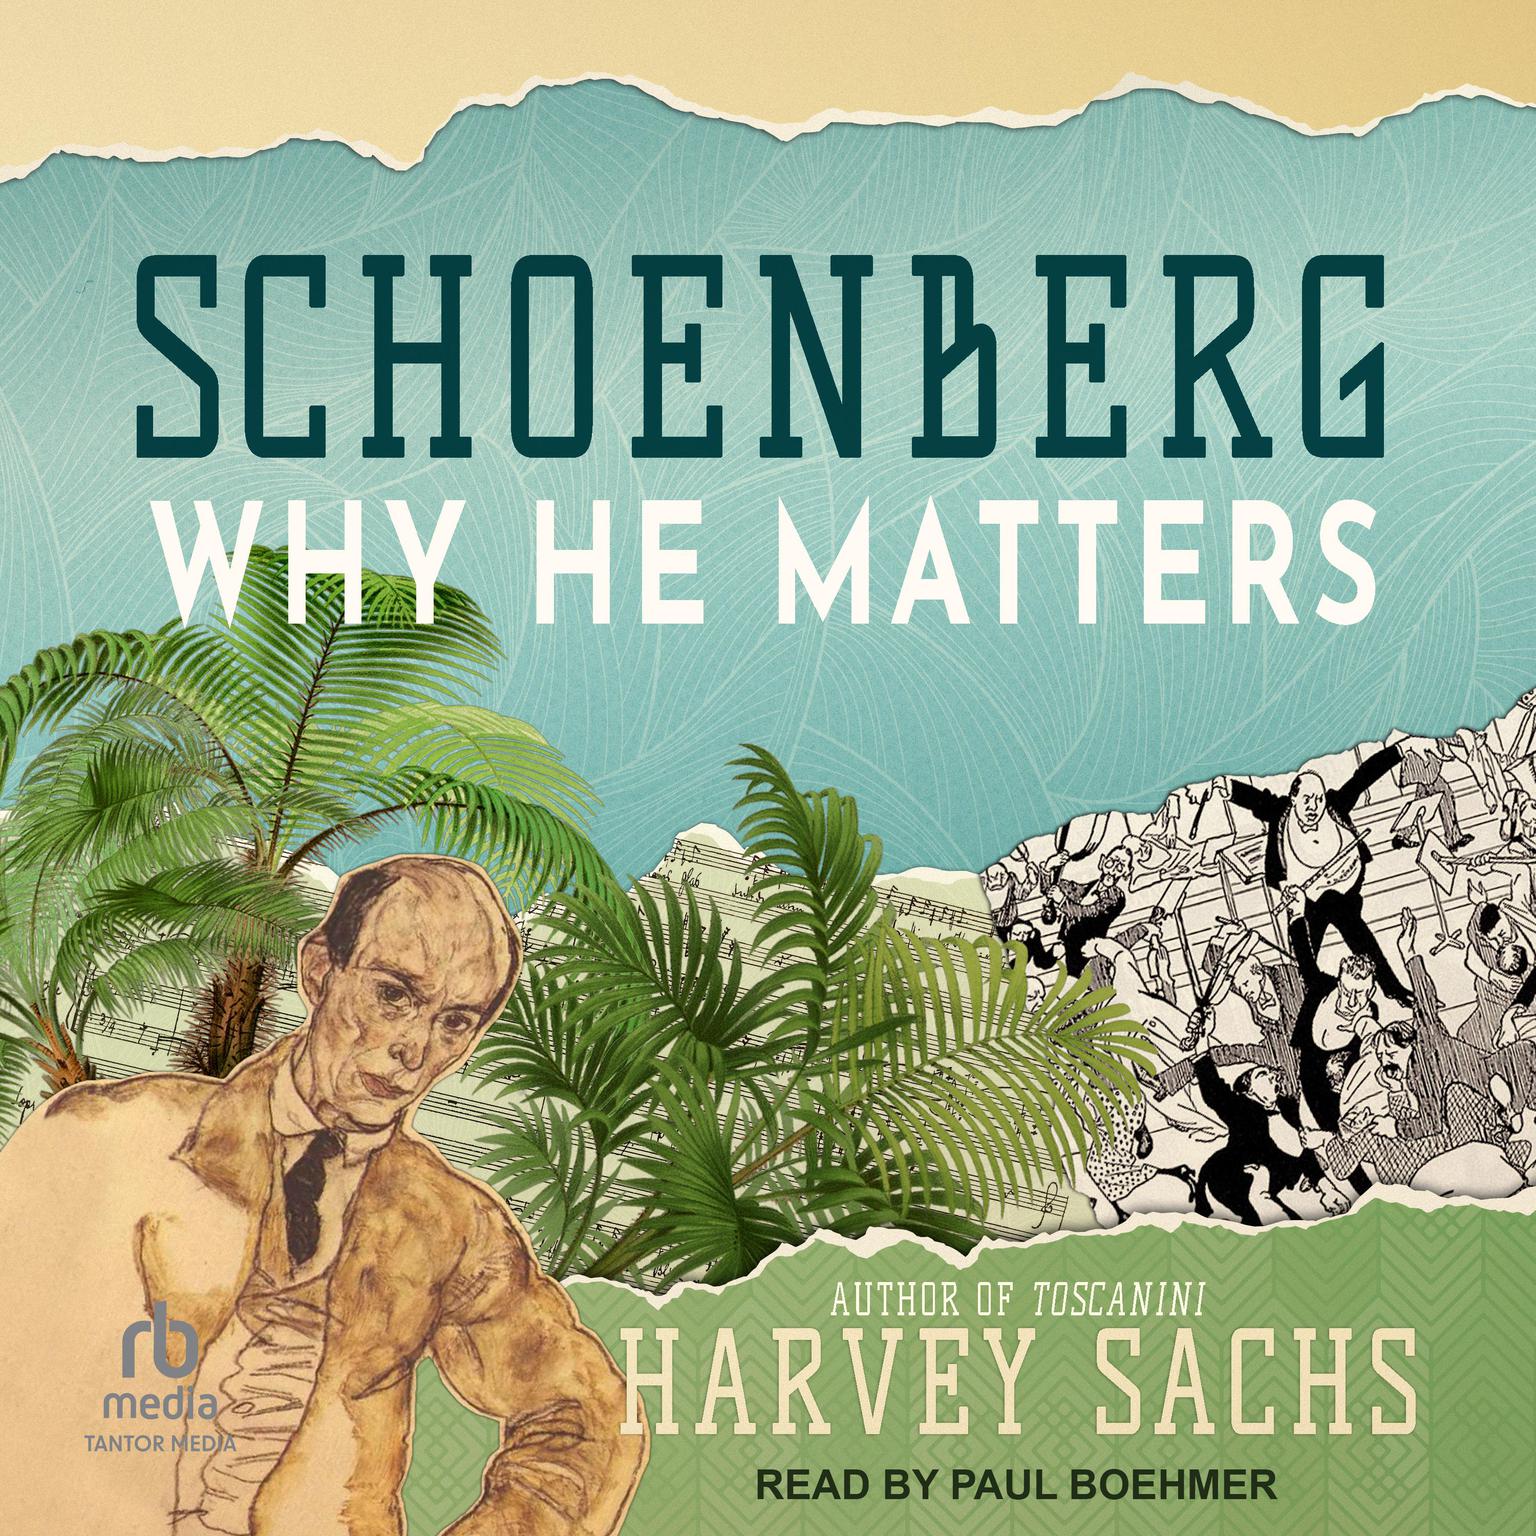 Schoenberg: Why He Matters Audiobook, by Harvey Sachs